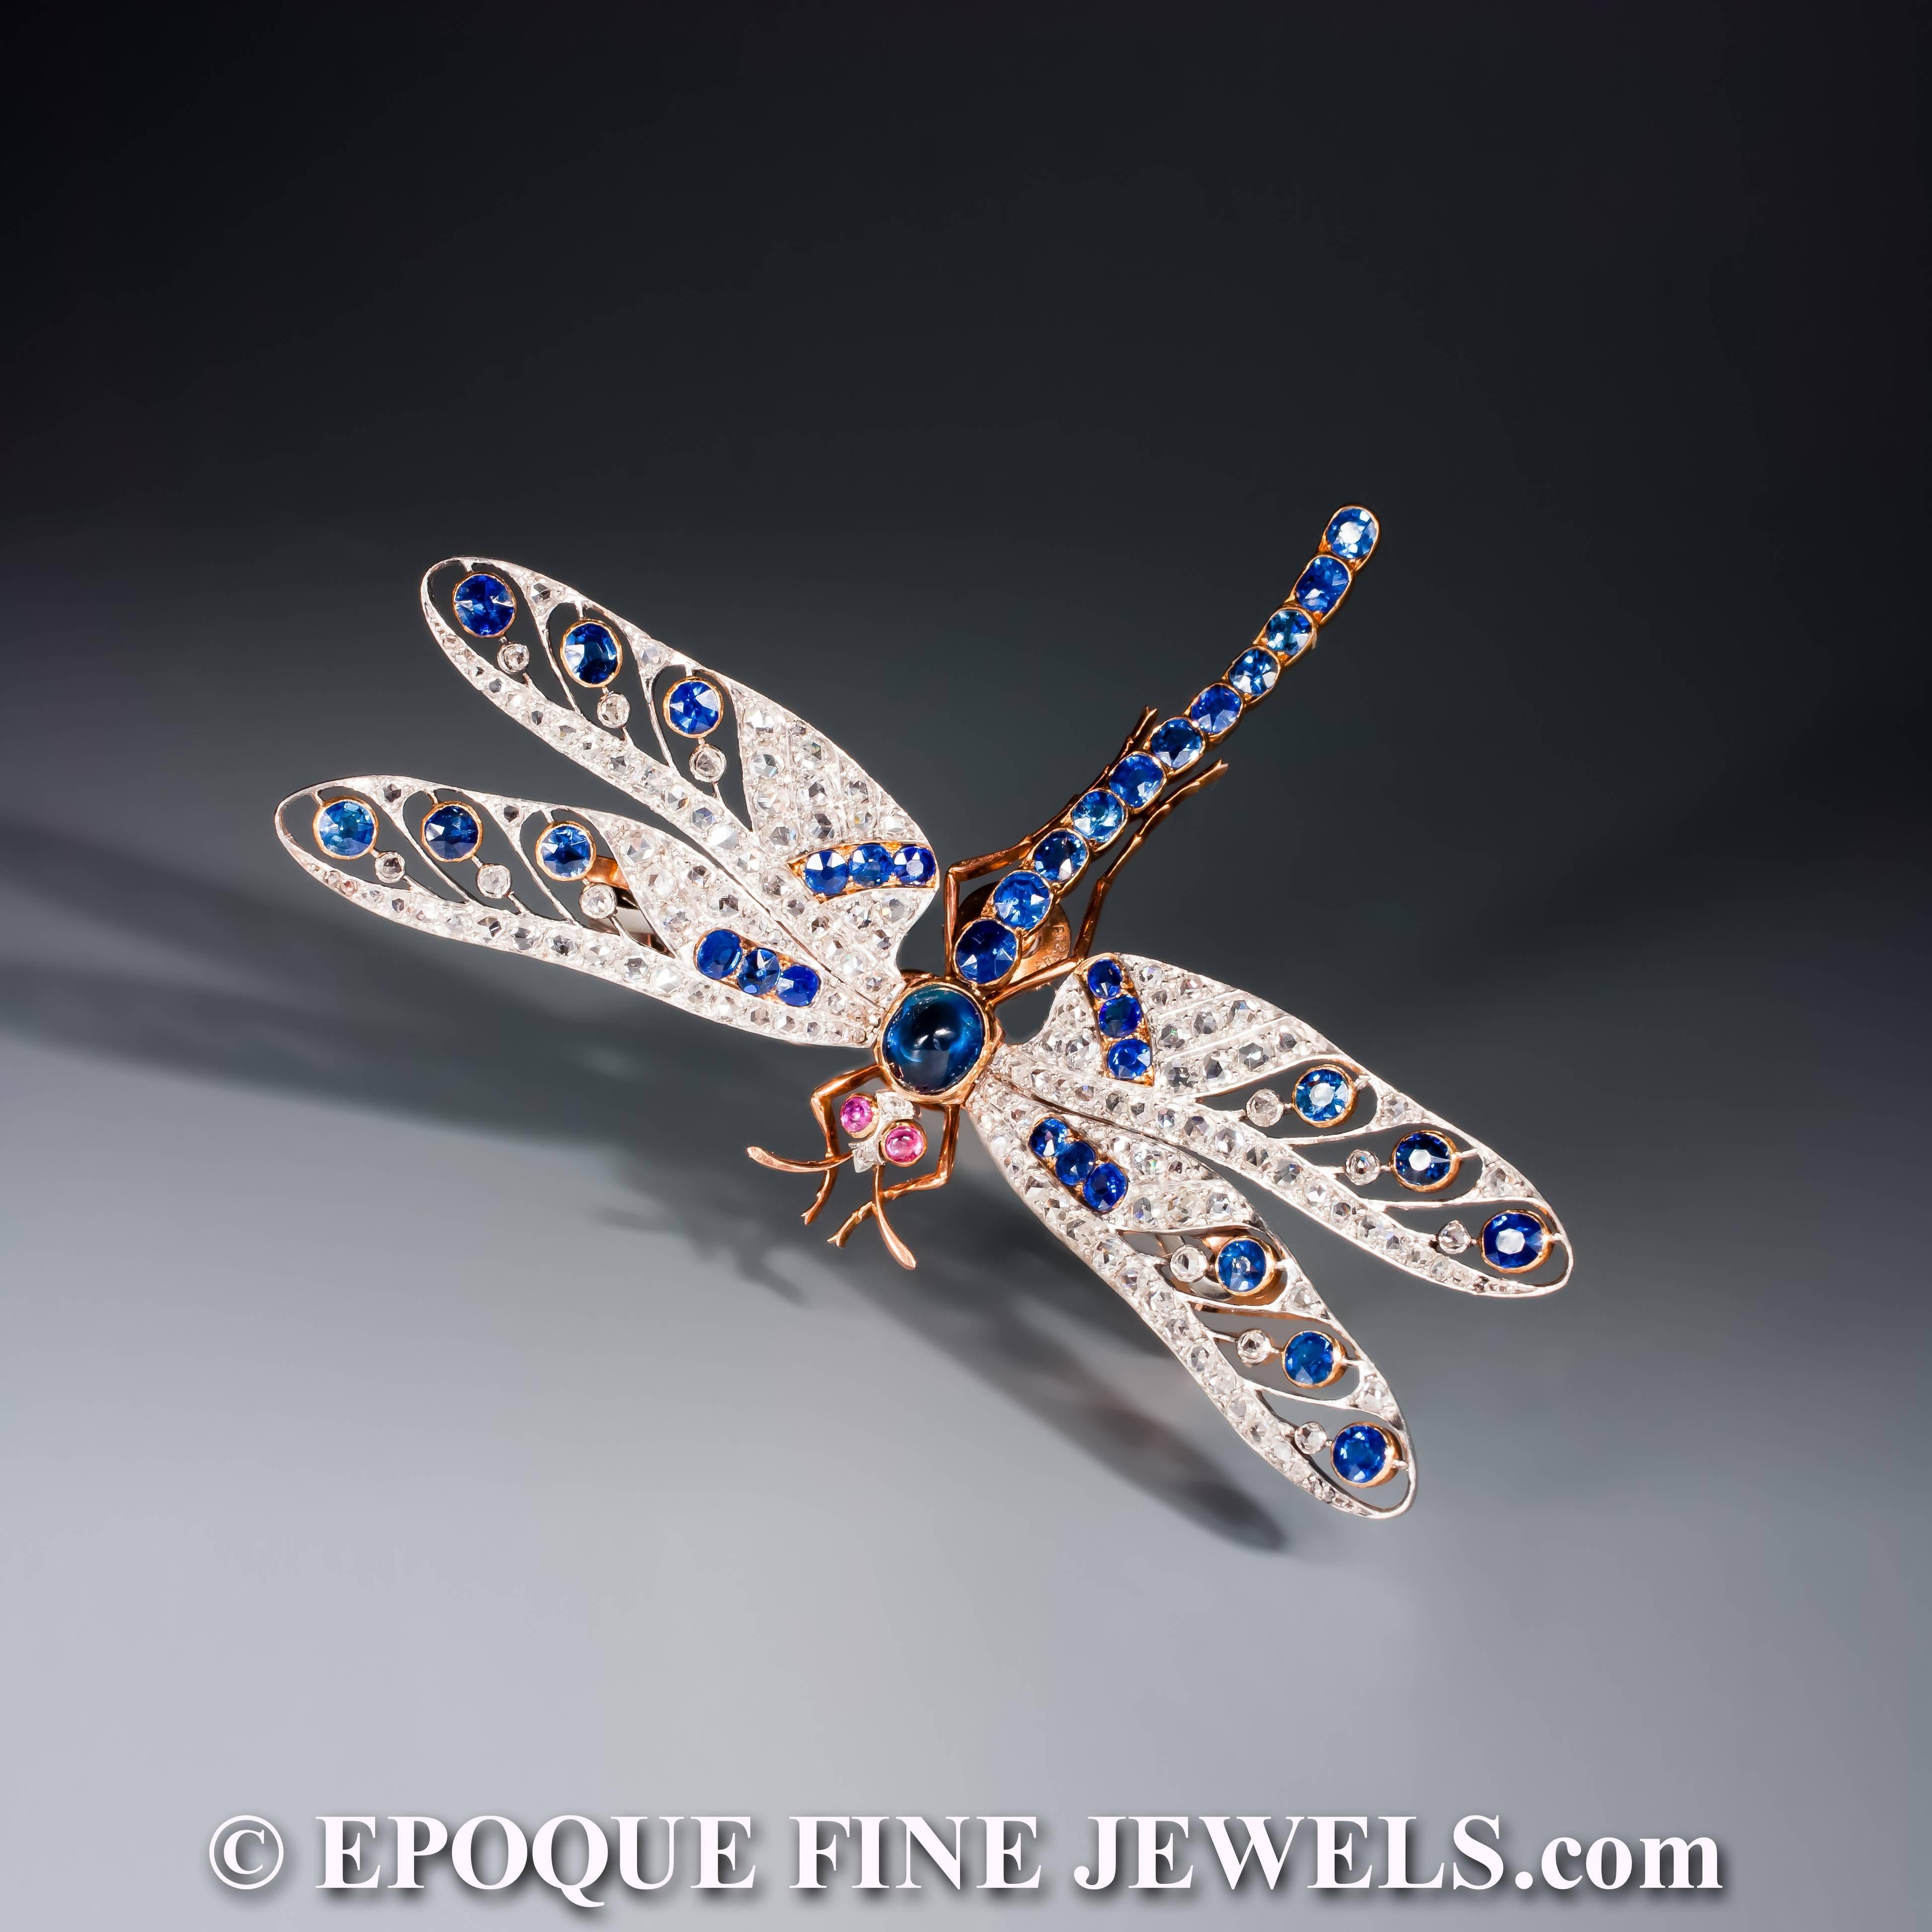 Joseph Nivelon Magnificent Antique En Tremblant Dragonfly Brooch  In Excellent Condition For Sale In Kortrijk, BE